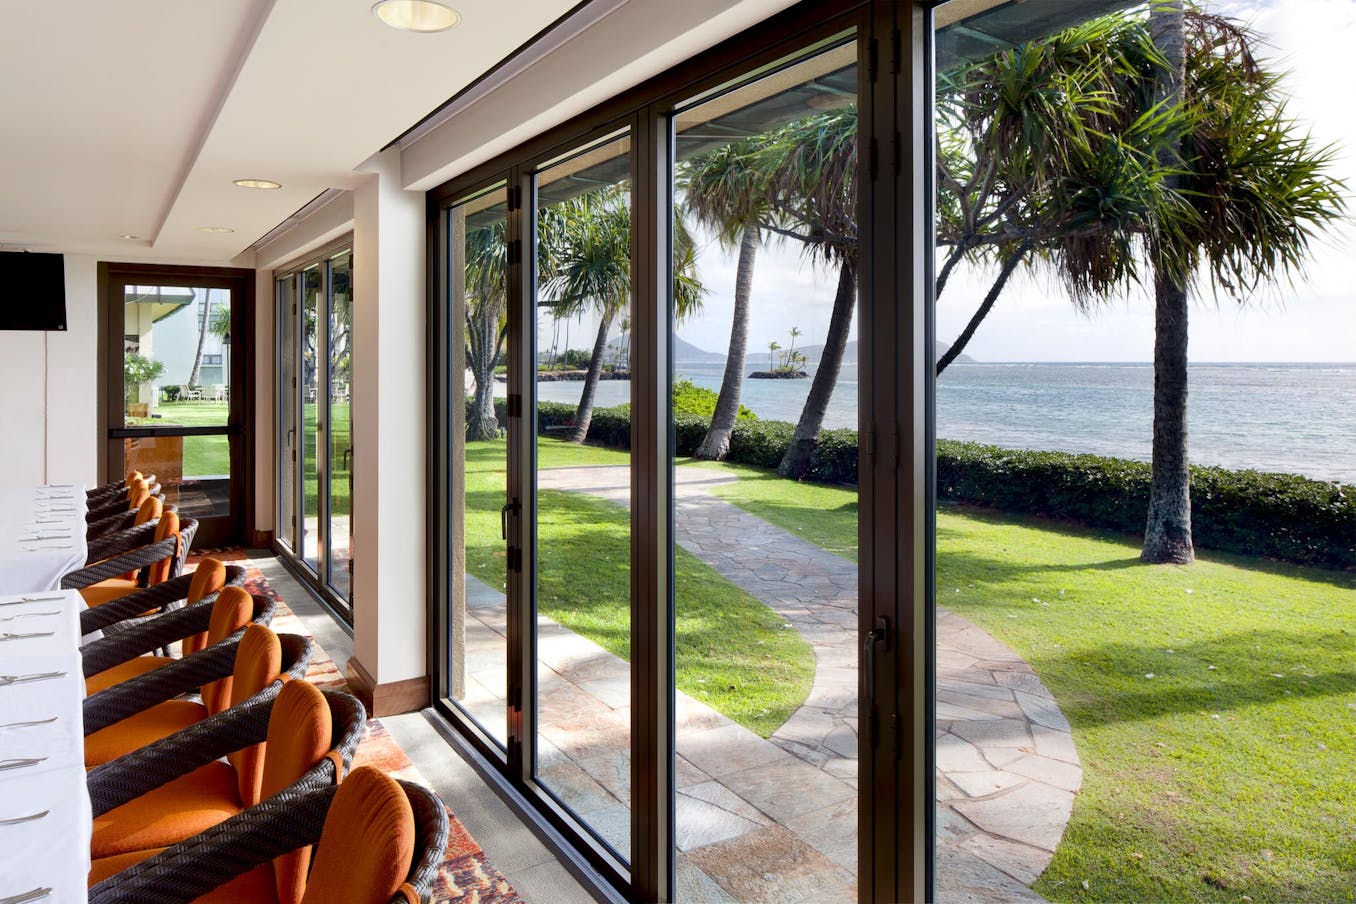 Country club dining area with a view of the ocean